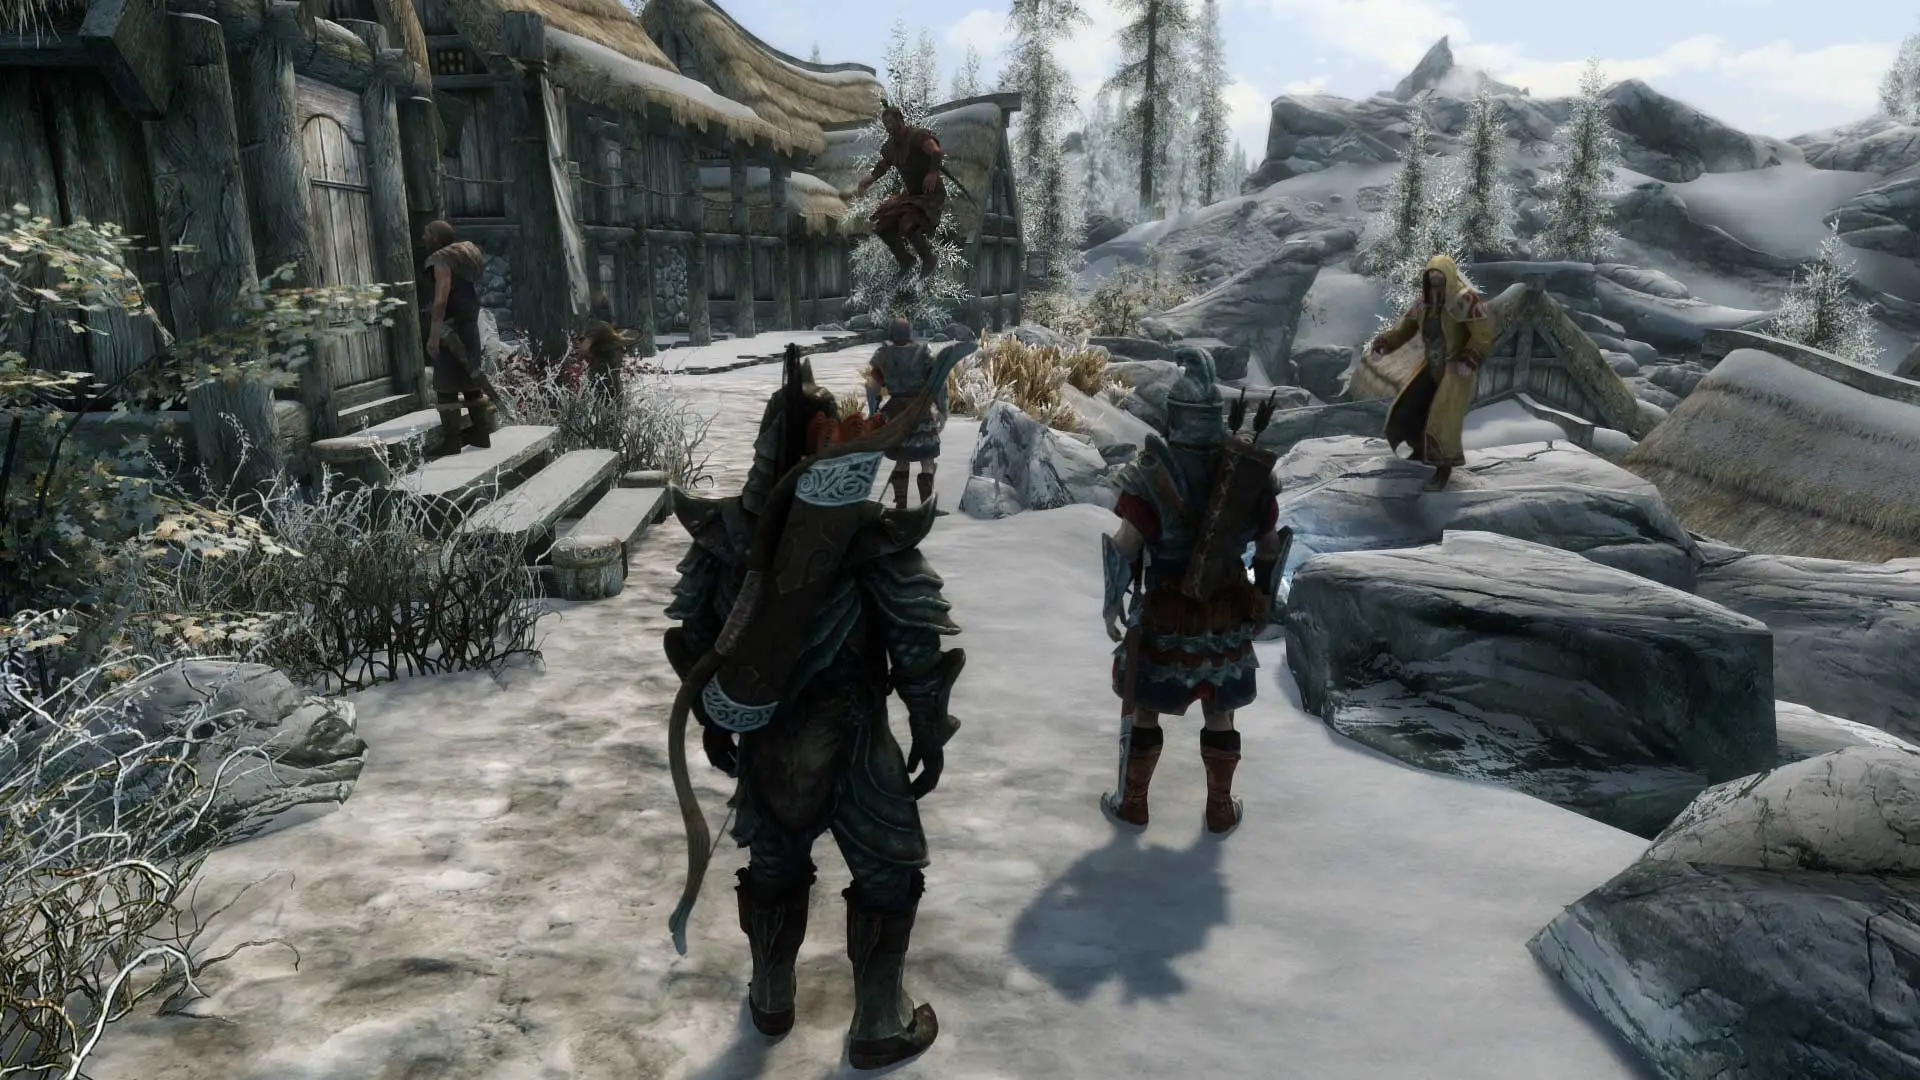 Skyrim is better with co-op, and new multiplayer mod to